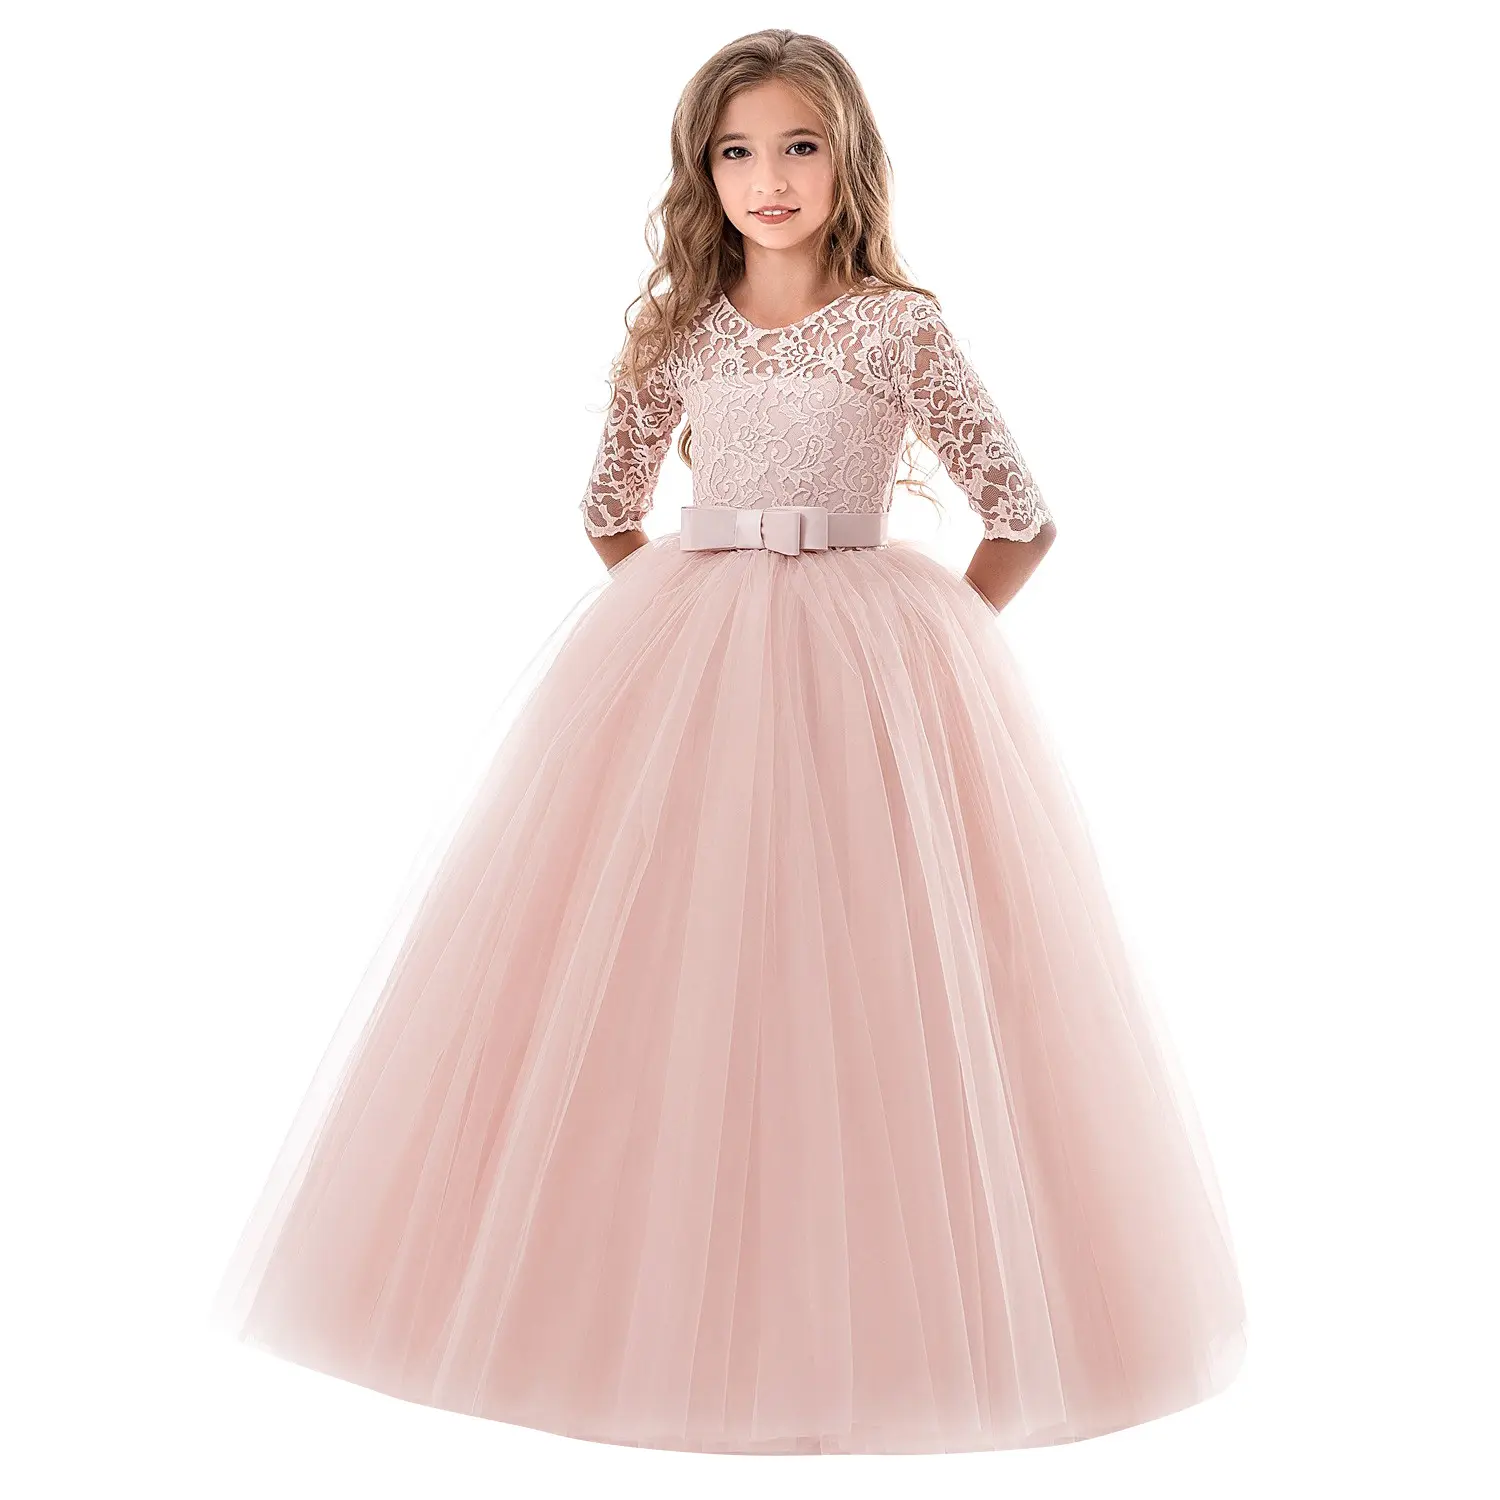 New princess lace flower embroidery Party Pageant kids dresses for girls of 6-14 years Wedding clothing